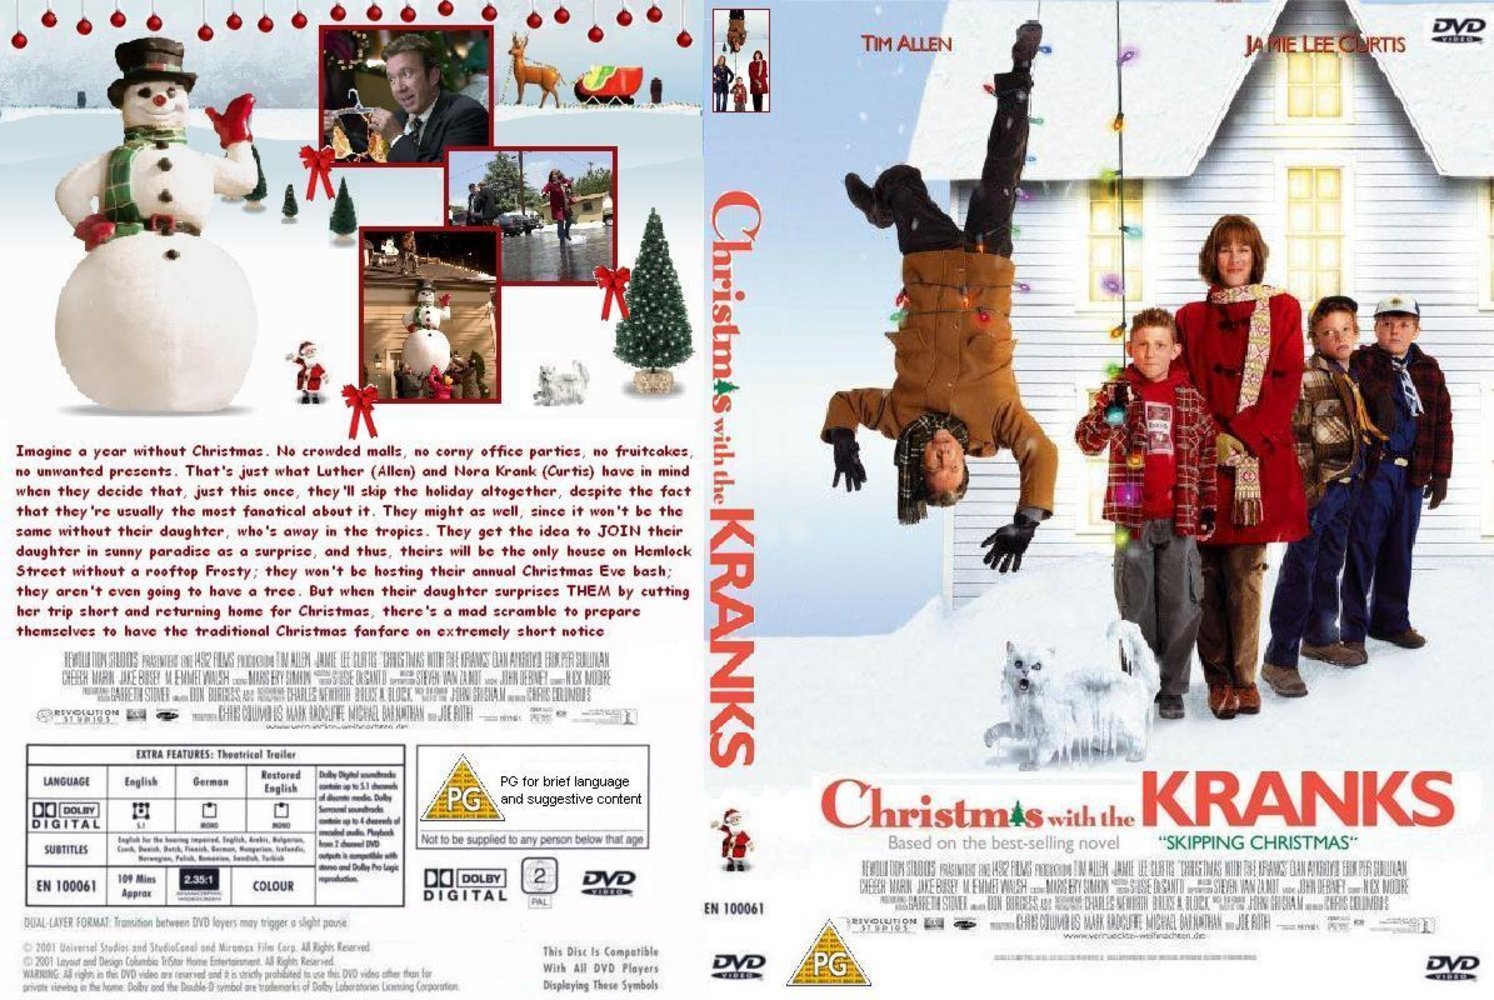 Jaquette DVD Christmas with the Cranks